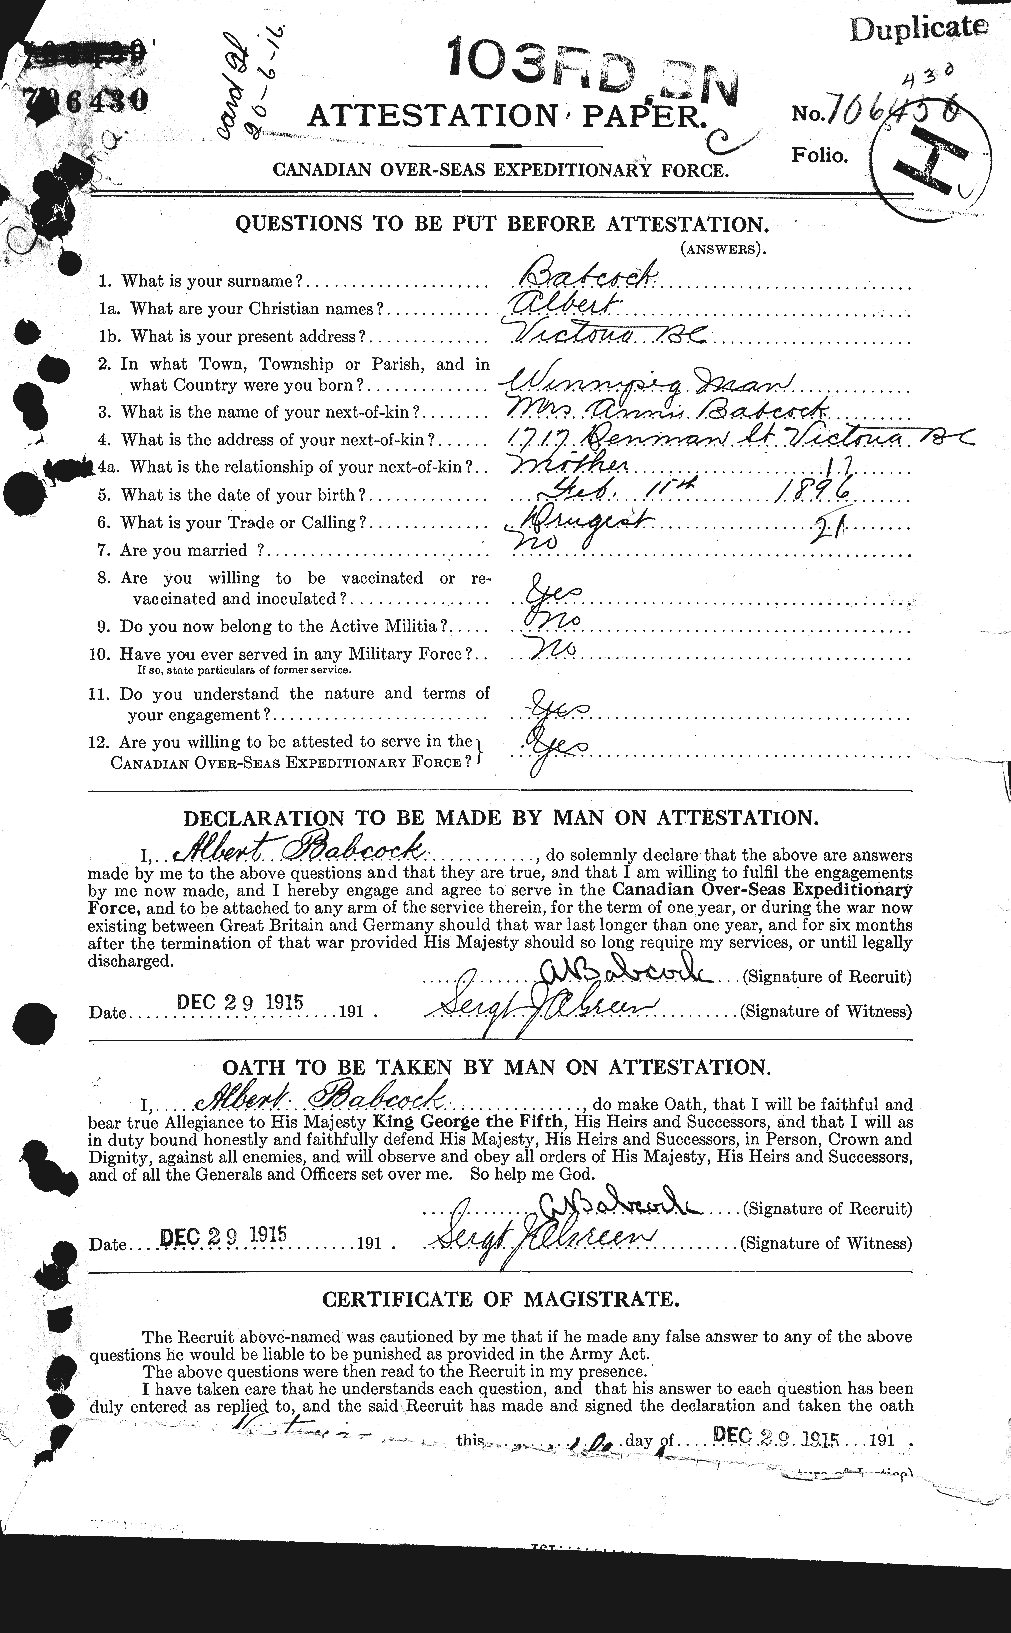 Personnel Records of the First World War - CEF 216015a